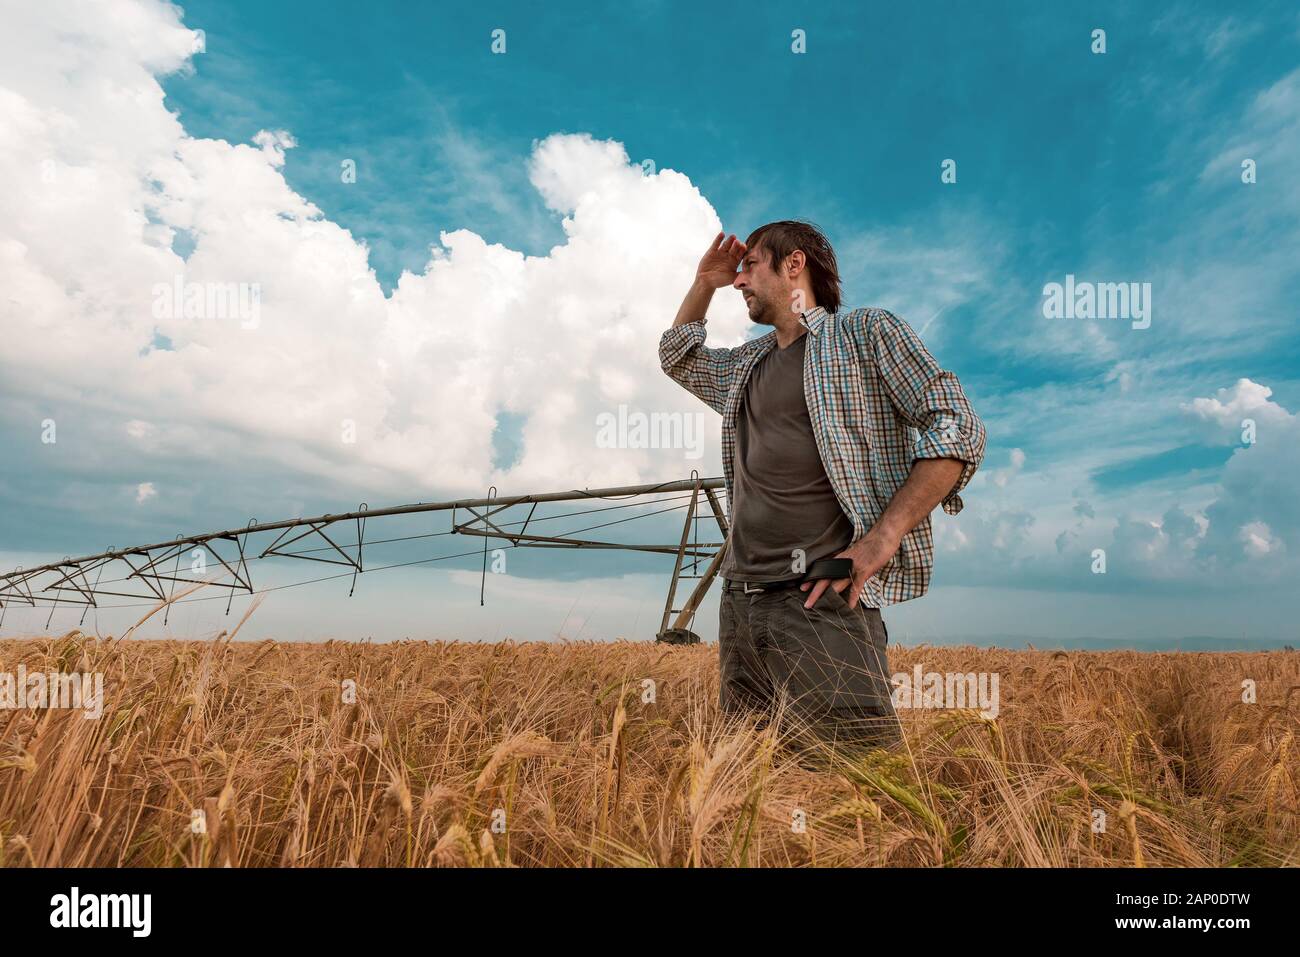 Worried farmer standing in ripe cultivated barley field while the strong wind is blowing, hoping for a better weather Stock Photo